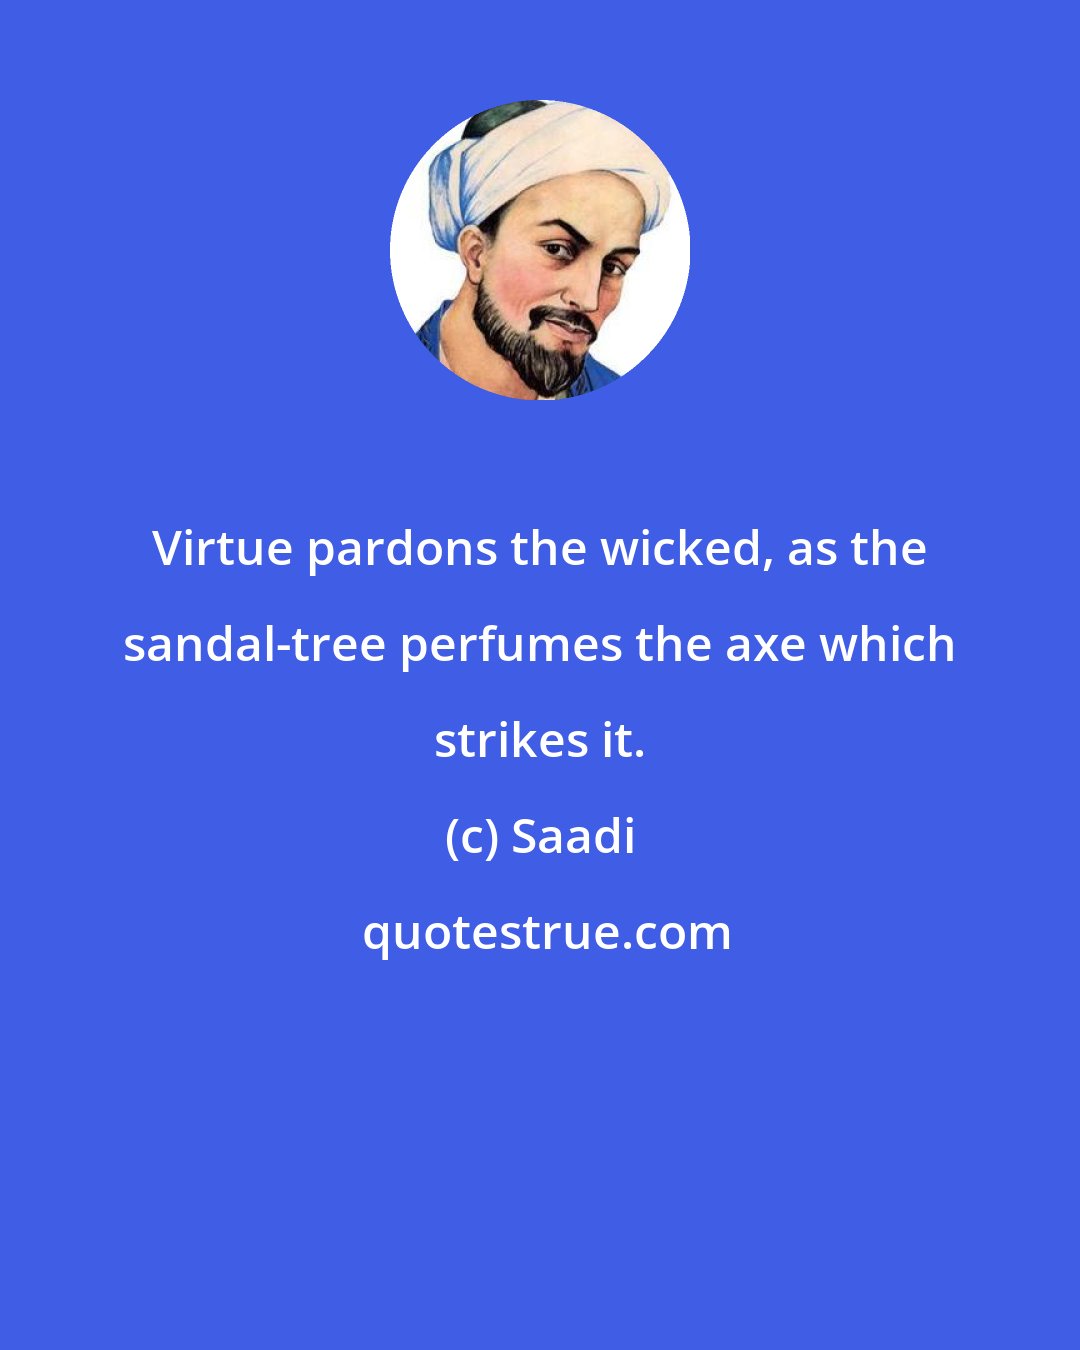 Saadi: Virtue pardons the wicked, as the sandal-tree perfumes the axe which strikes it.